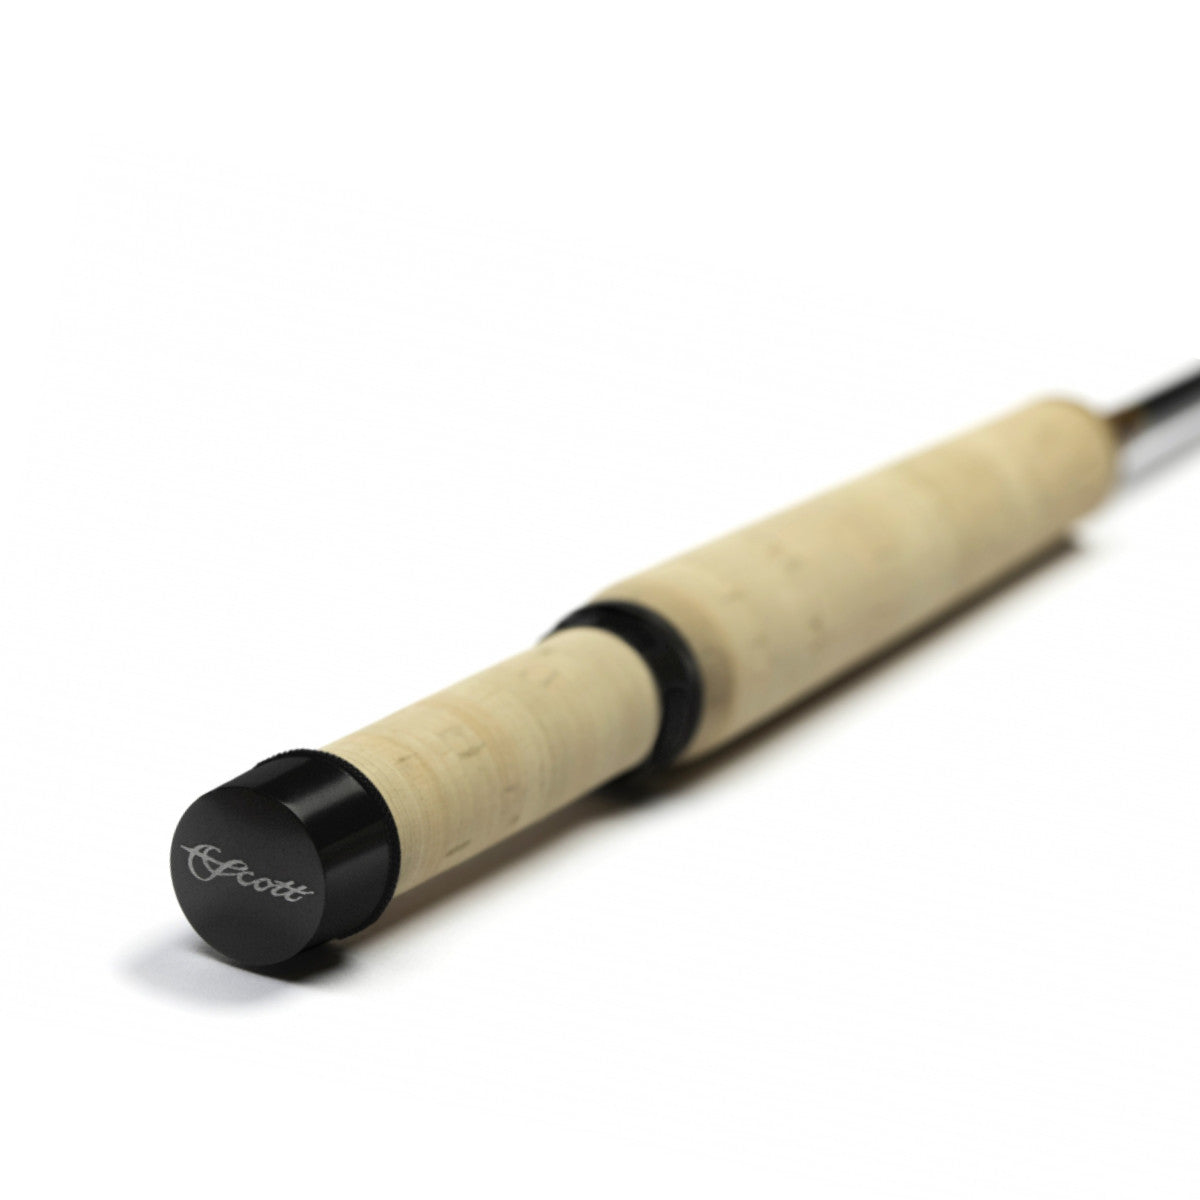 Scott Fly Rod Company releases high performance Session series